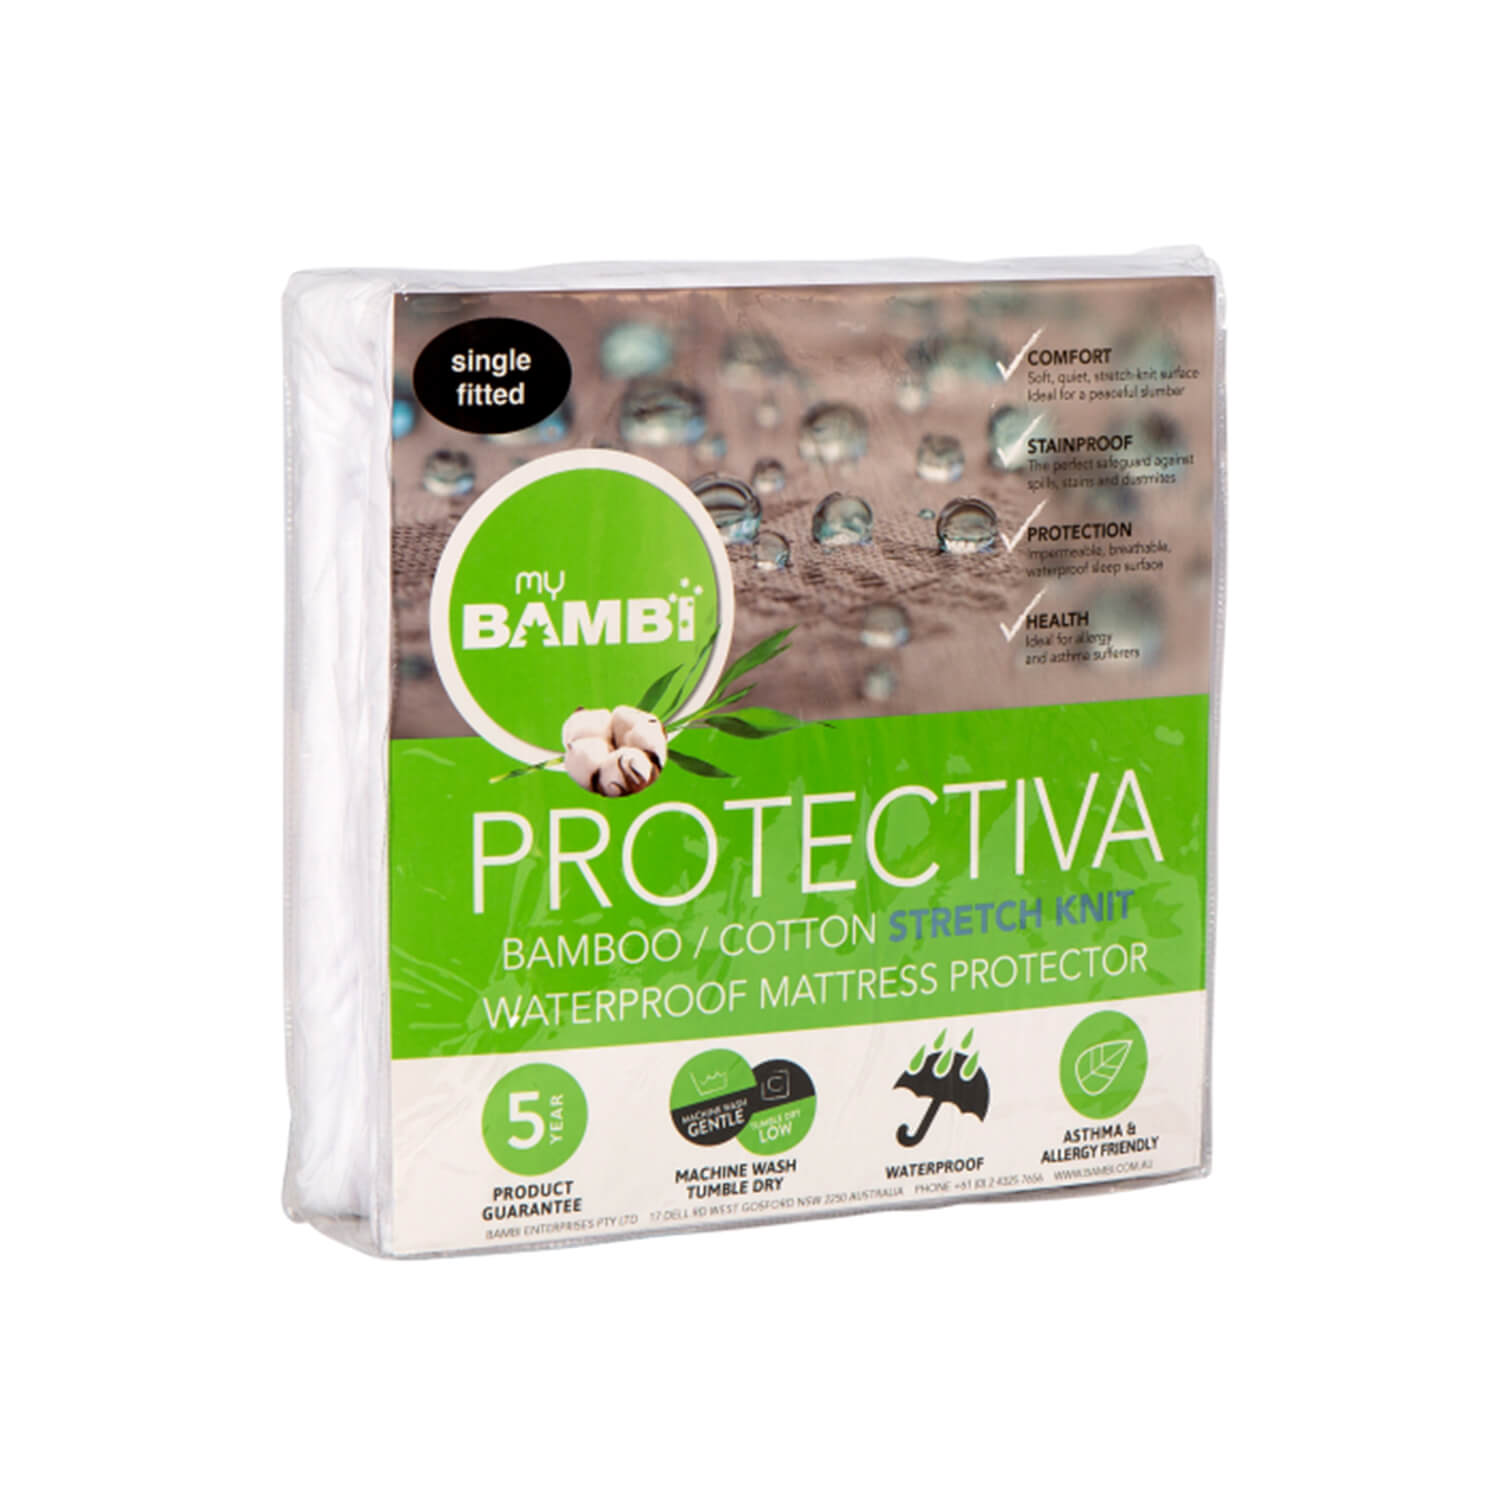 Protectiva Cotton/Bamboo Waterproof Mattress Protector | Stretch Knit by Bambi